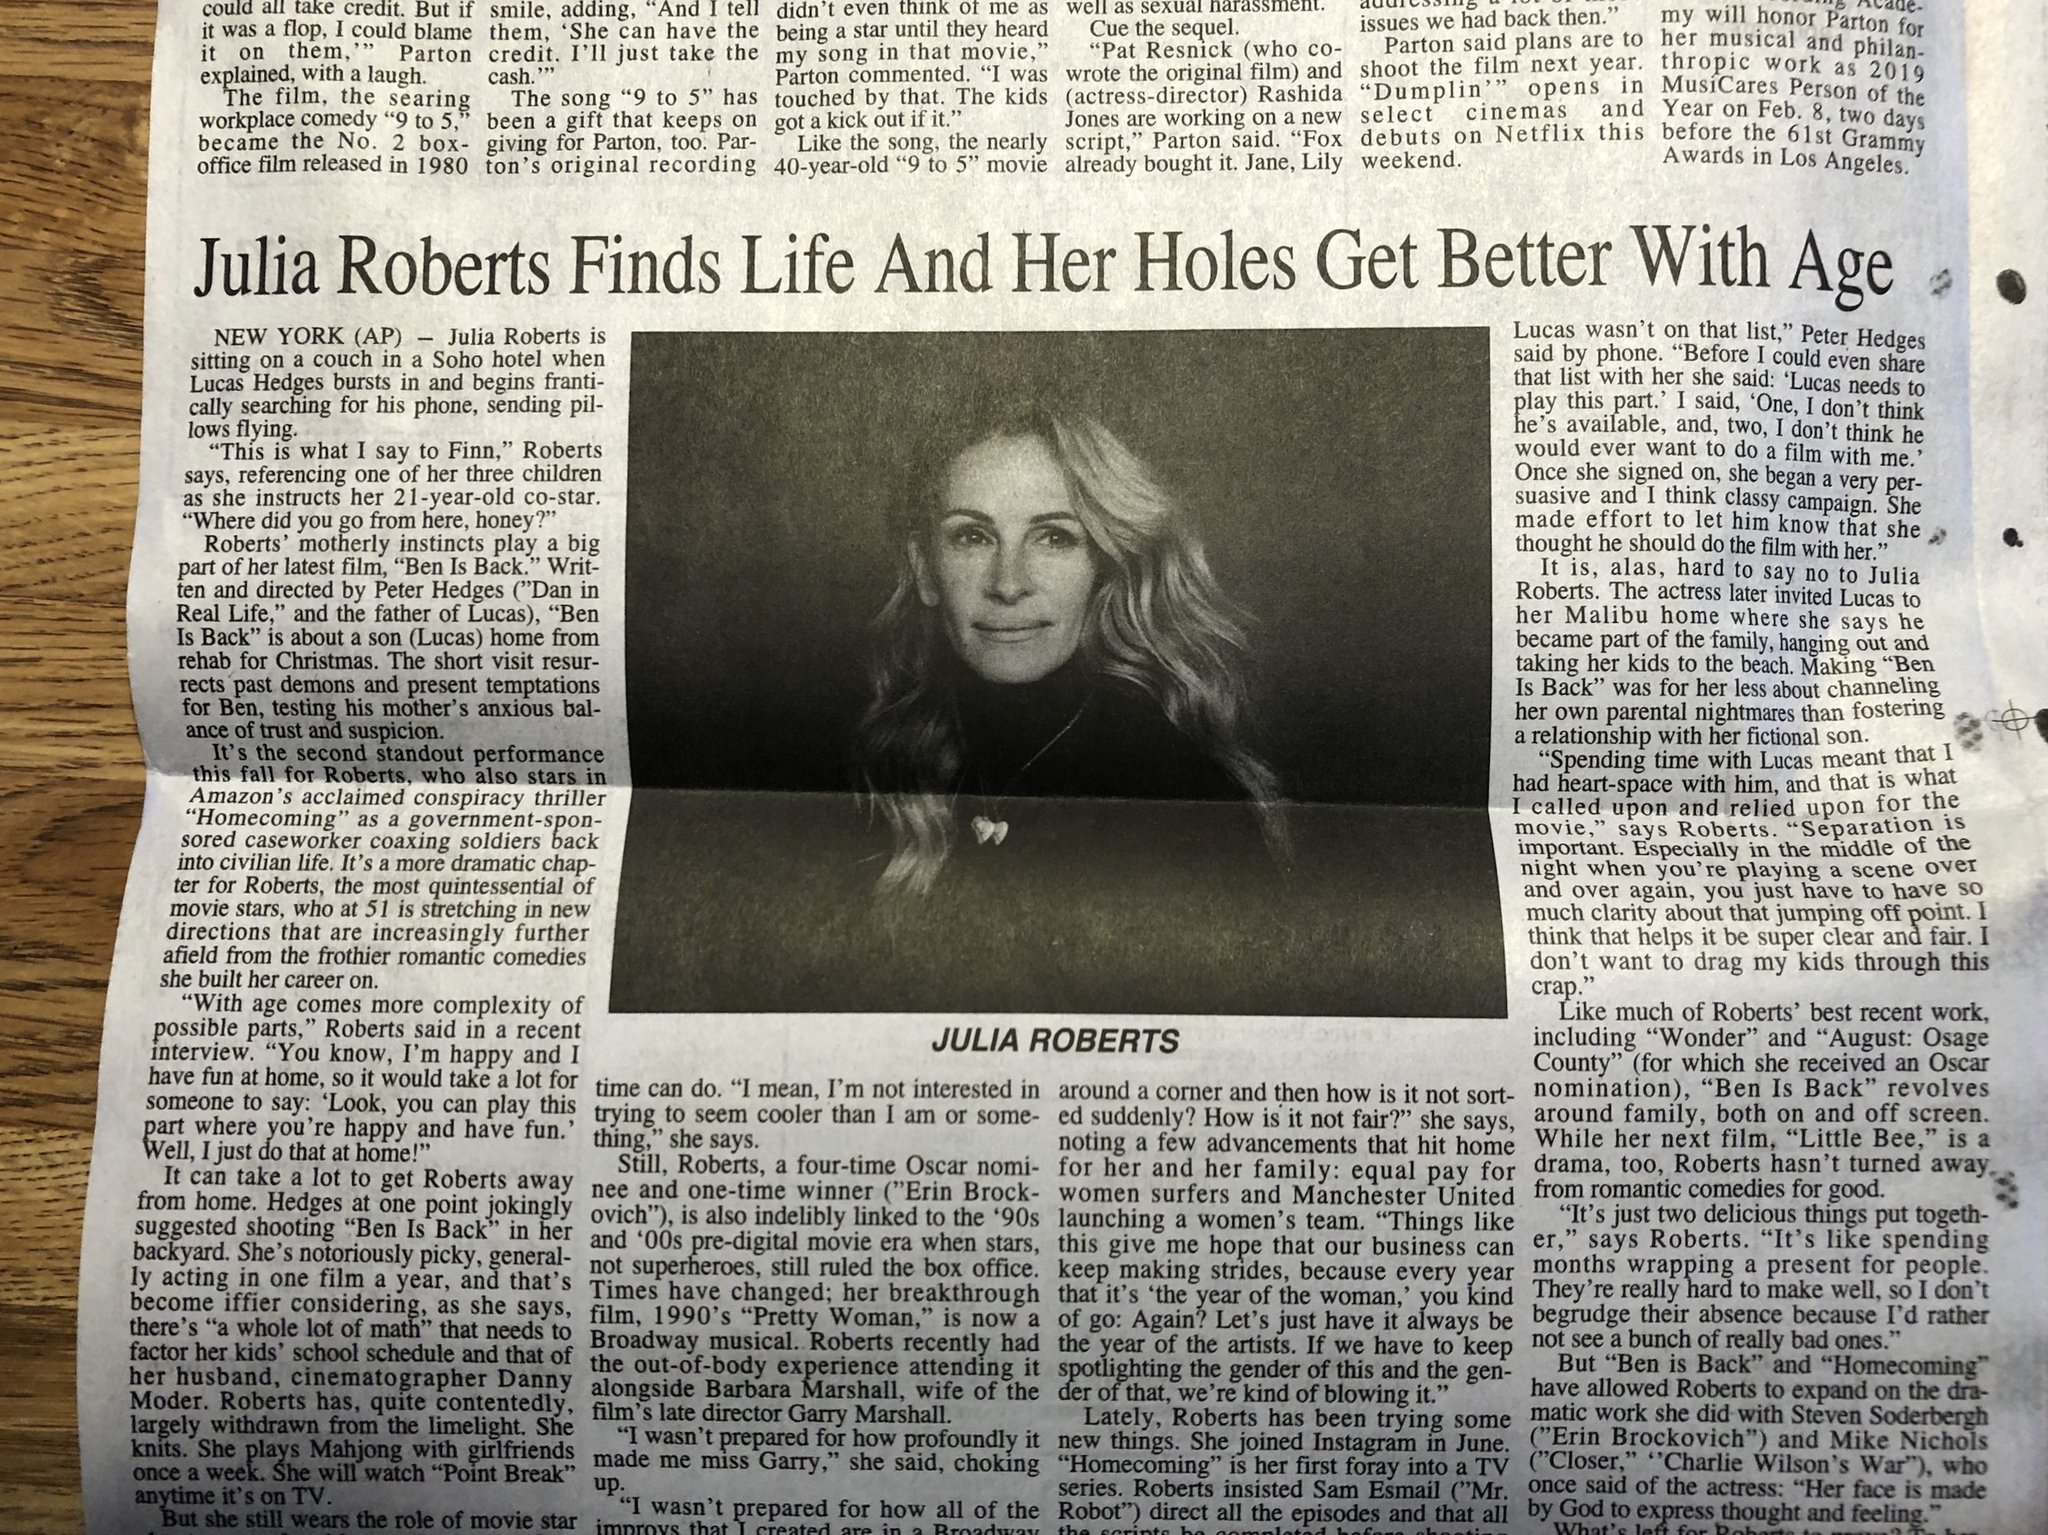 Newspaper Headline Typo Claims Julia Roberts' 'Holes' Get Better With Age